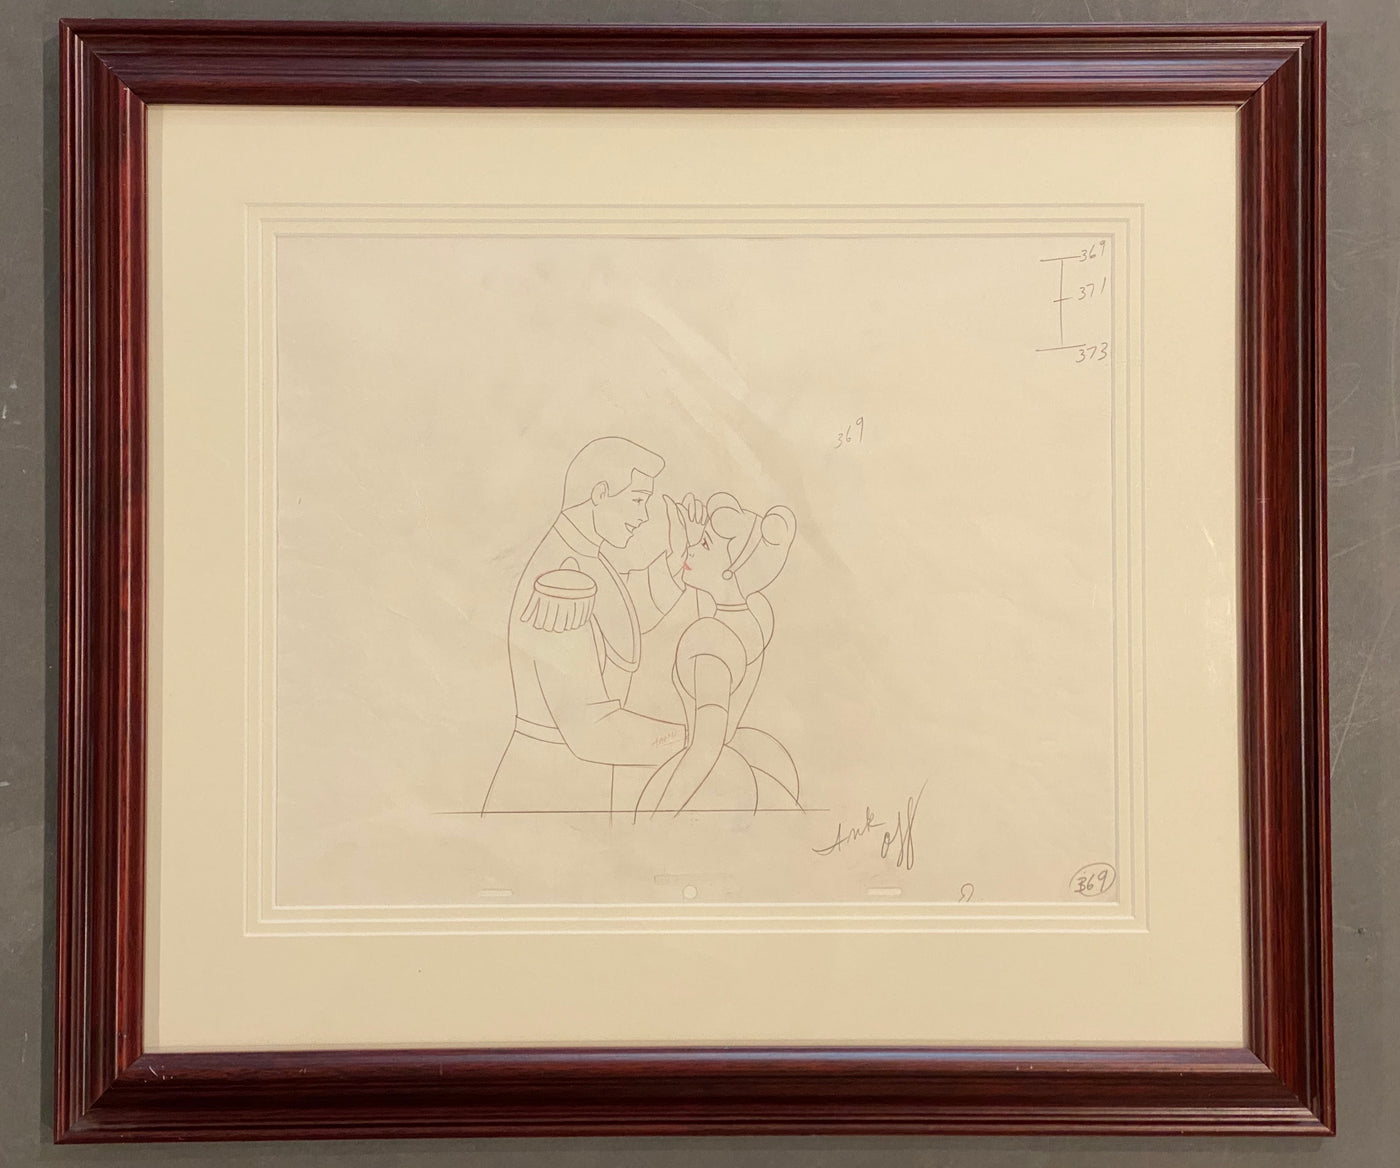 Original Walt Disney Production Drawing from Cinderella featuring Cinderella and Prince Charming